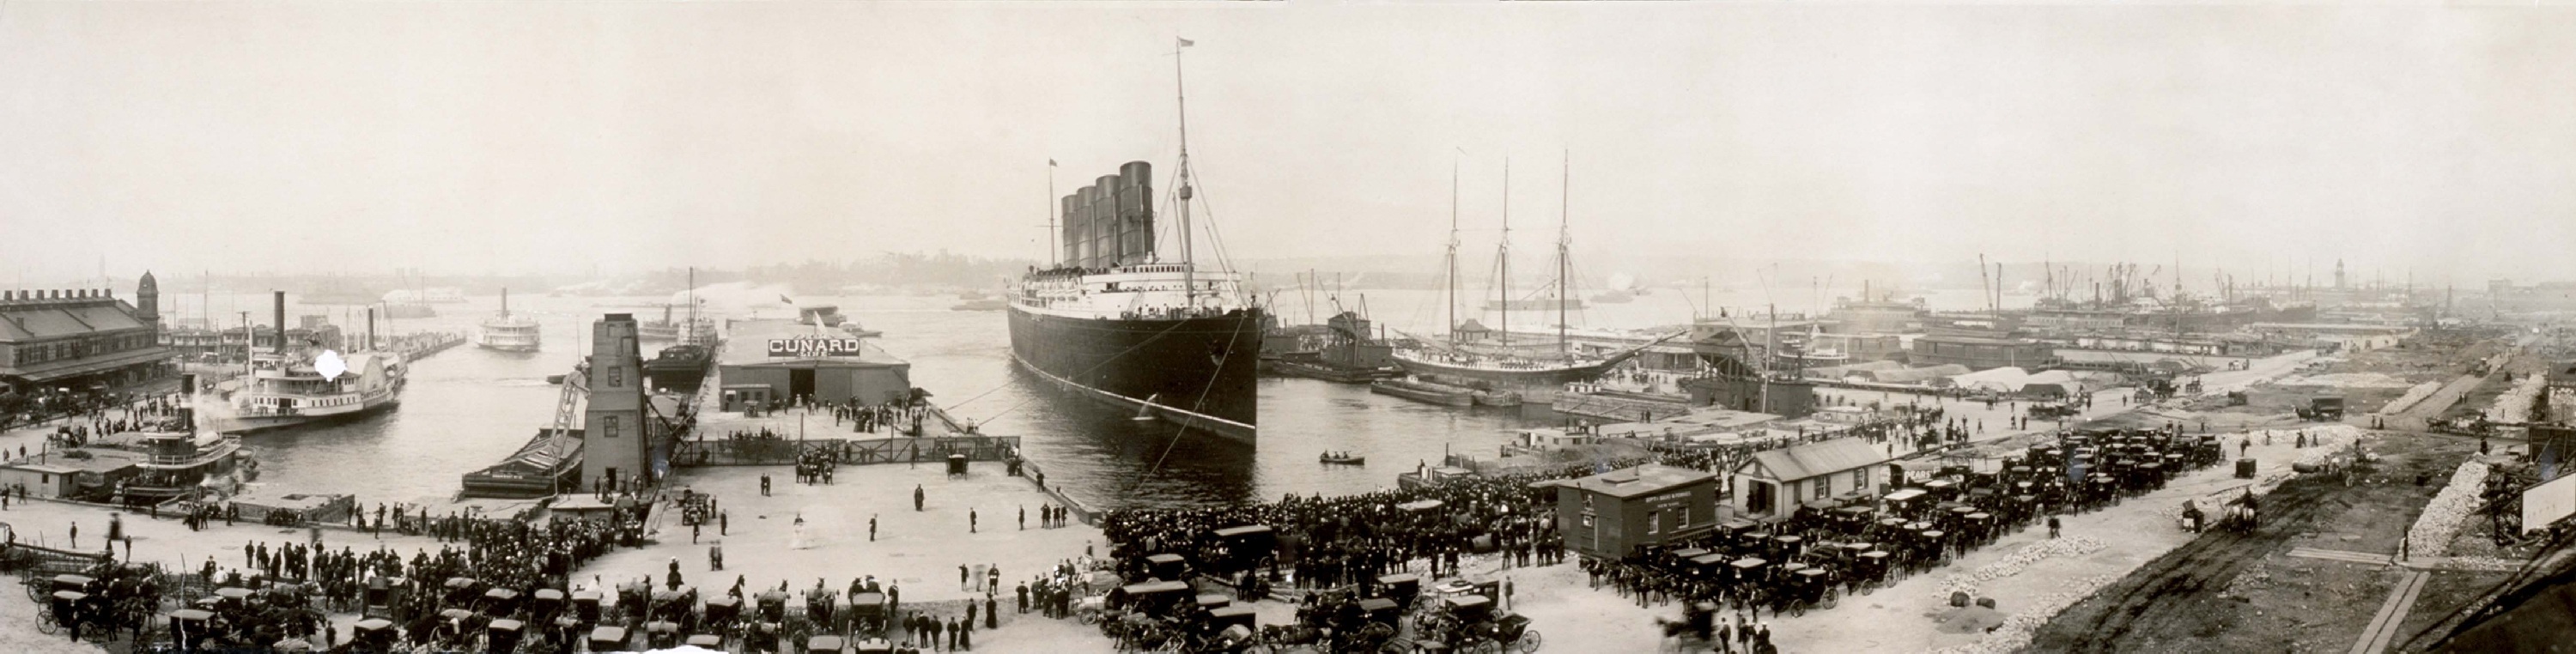 Lusitania: 18 Minutes That Changed the World